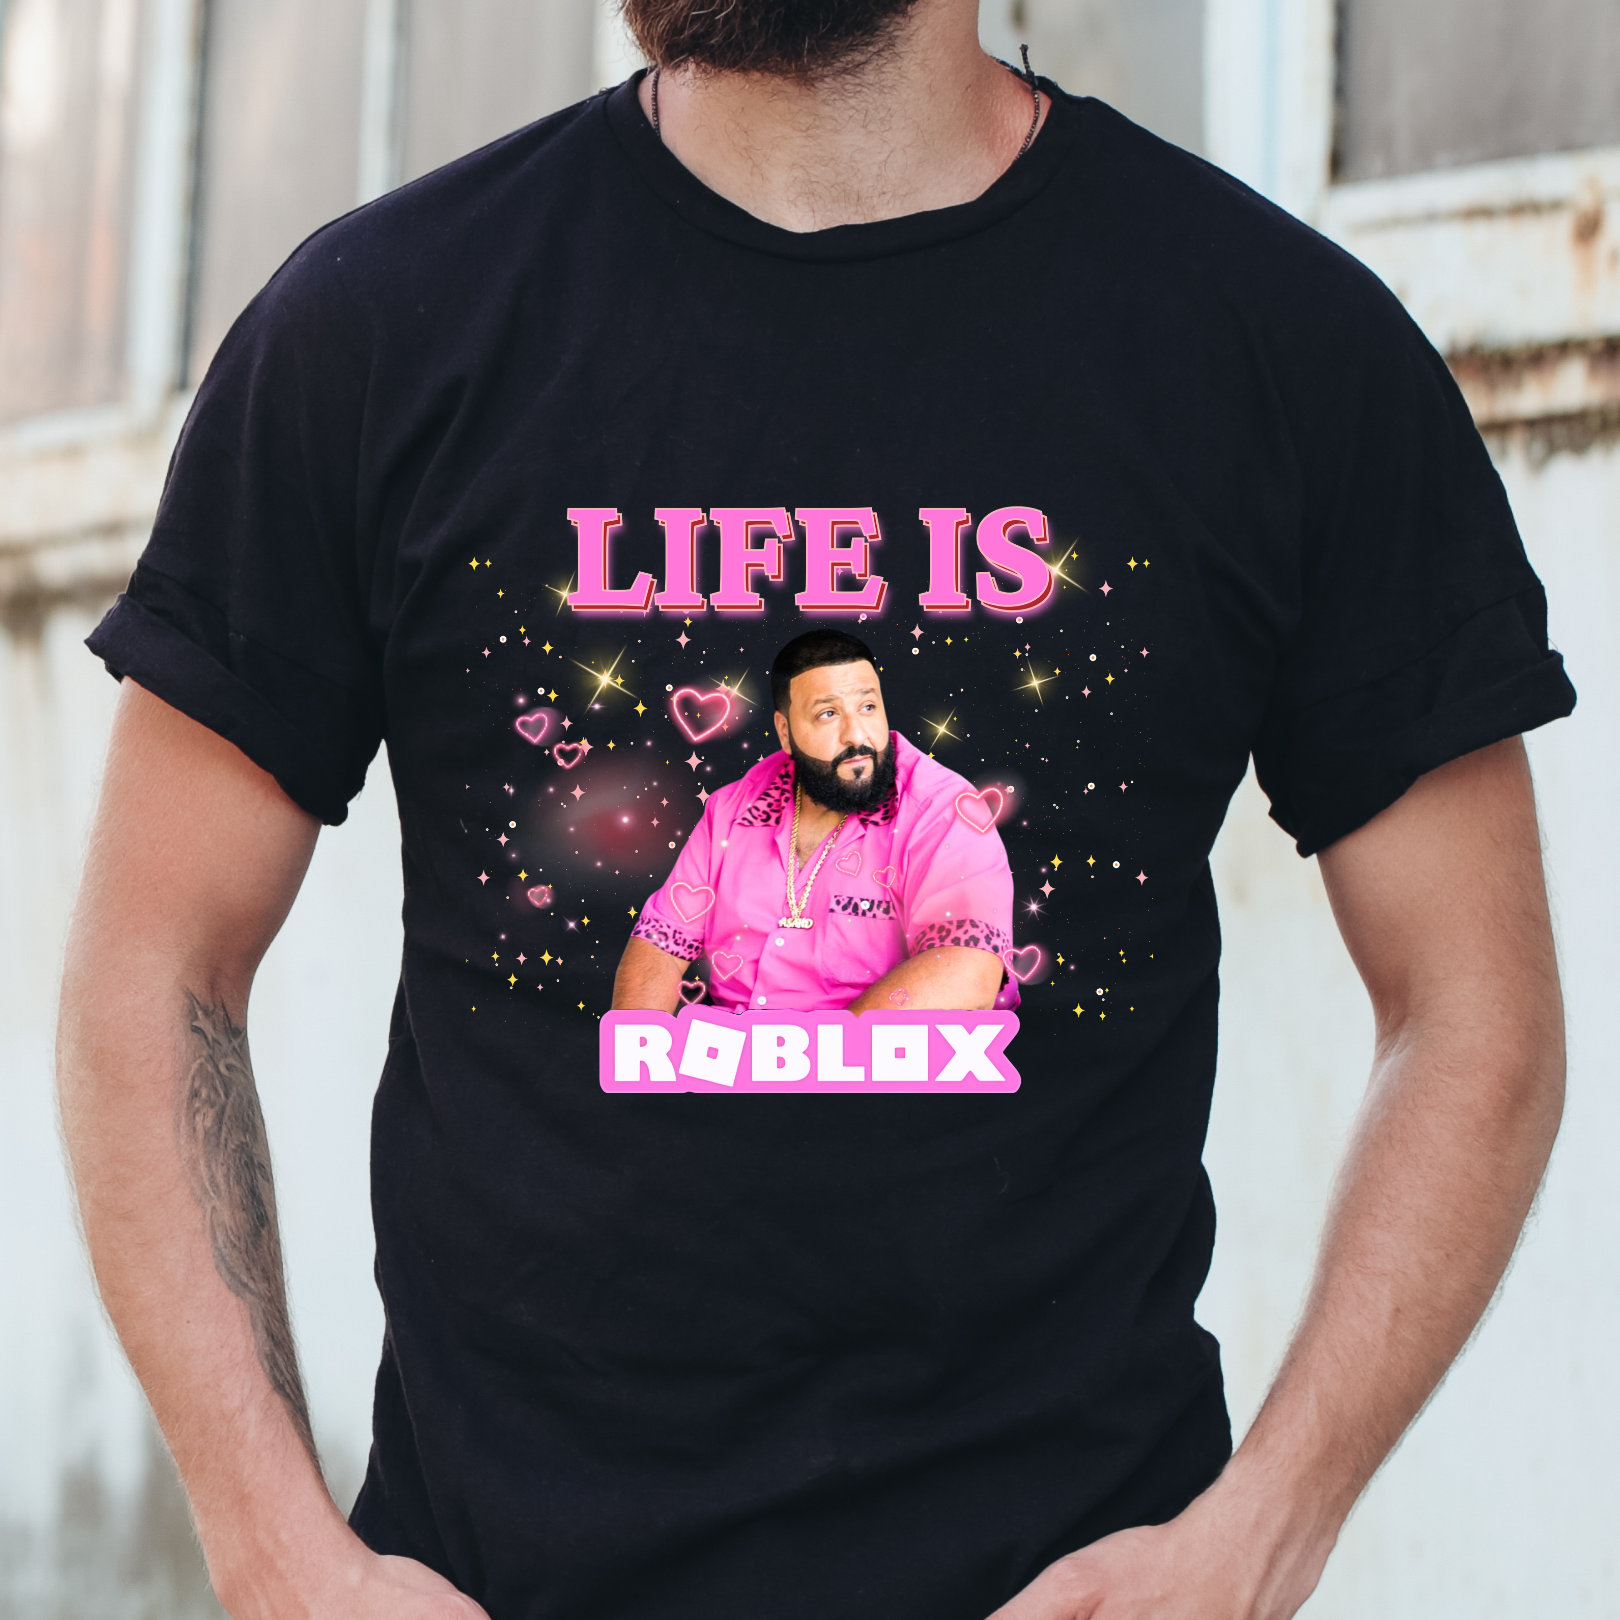 Create meme t shirt roblox for girls, t shirt for roblox, roblox t shirt  - Pictures 